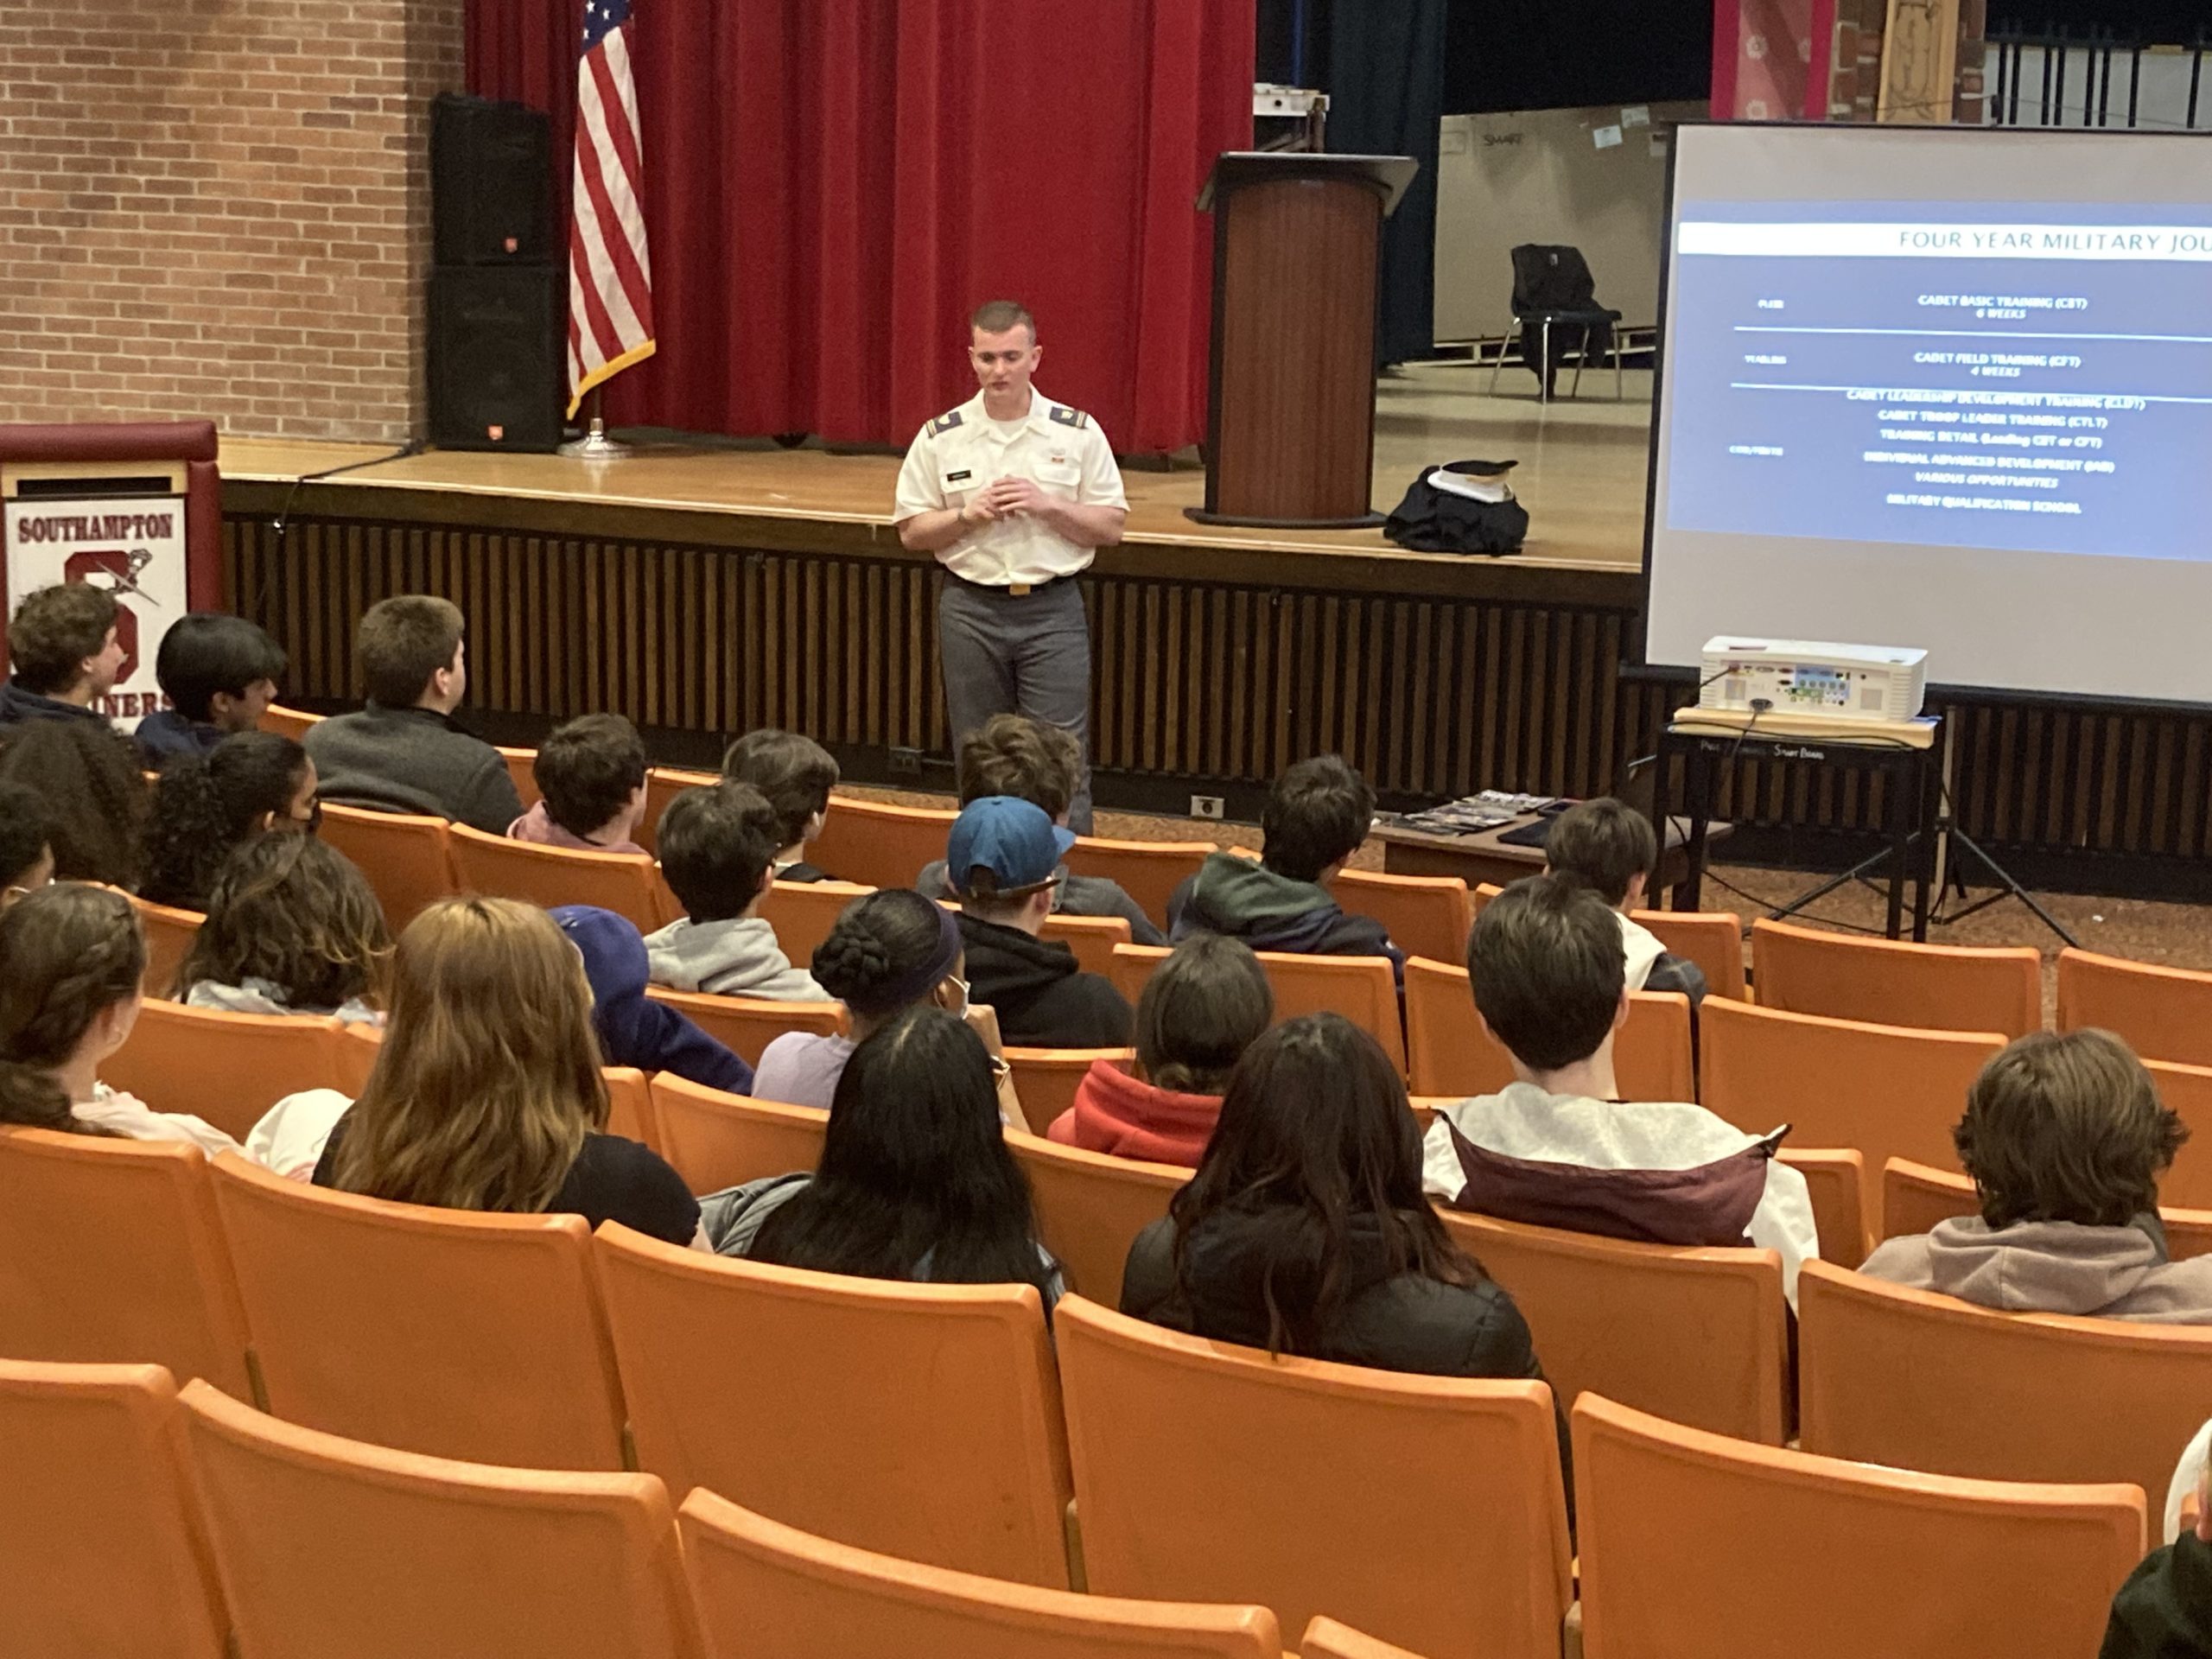 Southampton High School students recently learned more about the U.S. Military Academy West Point. During their social studies classes, they heard from and asked questions of Thomas Gabrielle, a 2019 Southampton High School graduate who is currently a junior at West Point.